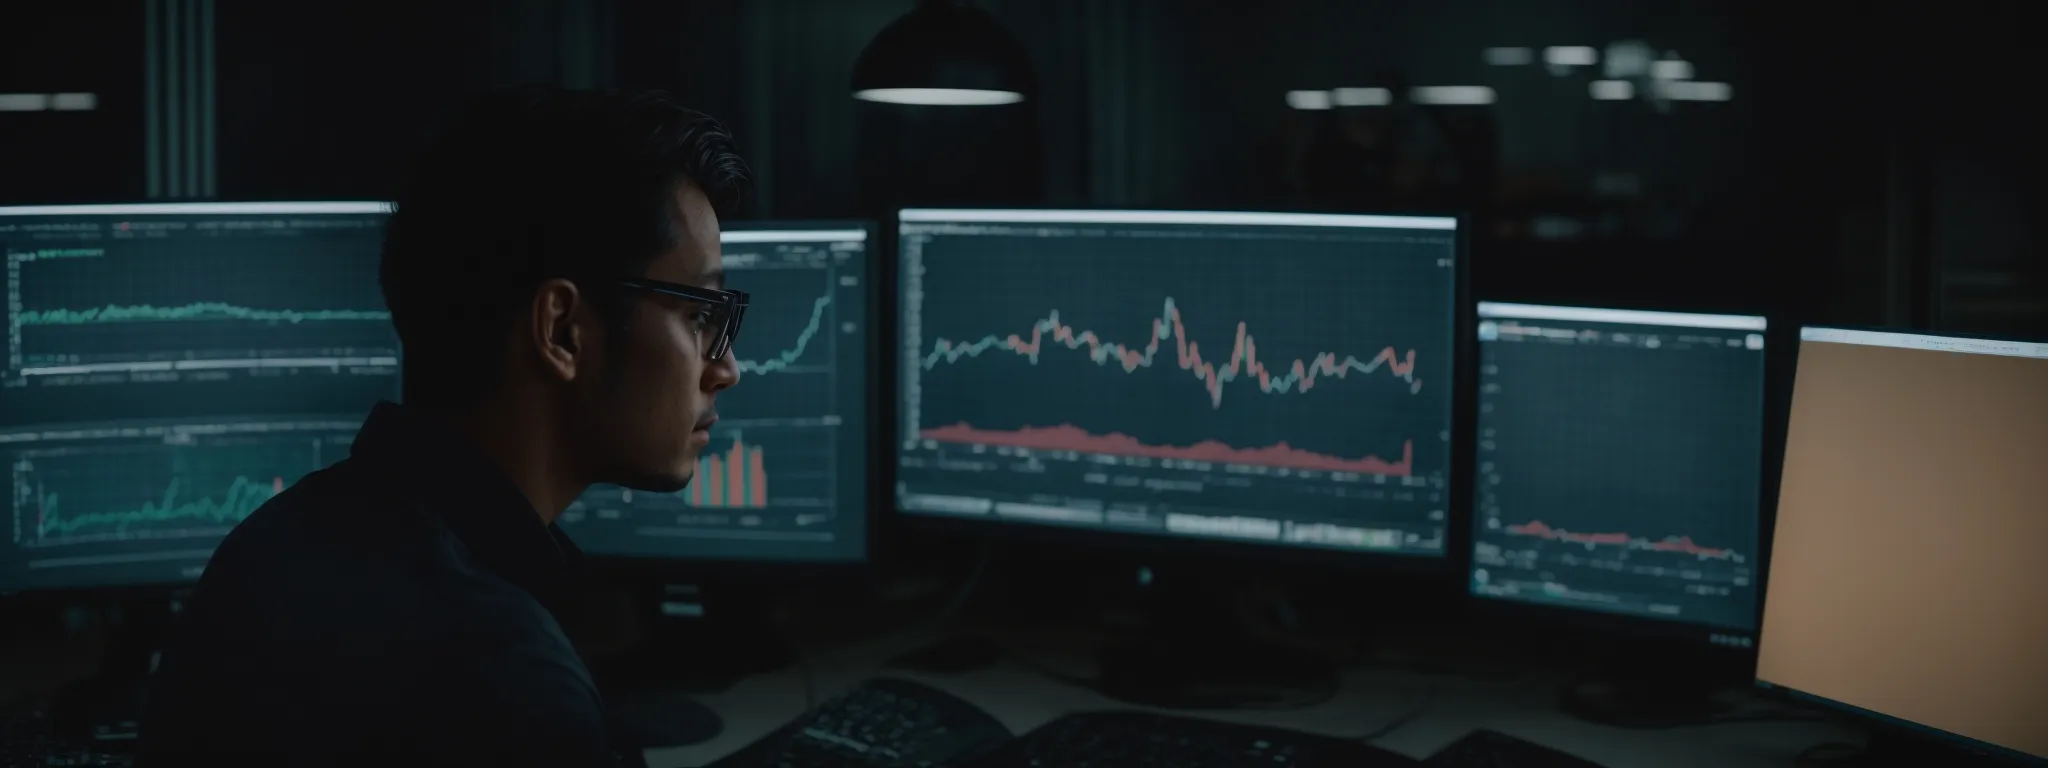 a marketer intently analyzes graphs on a computer screen, reflecting a deep dive into content performance metrics.